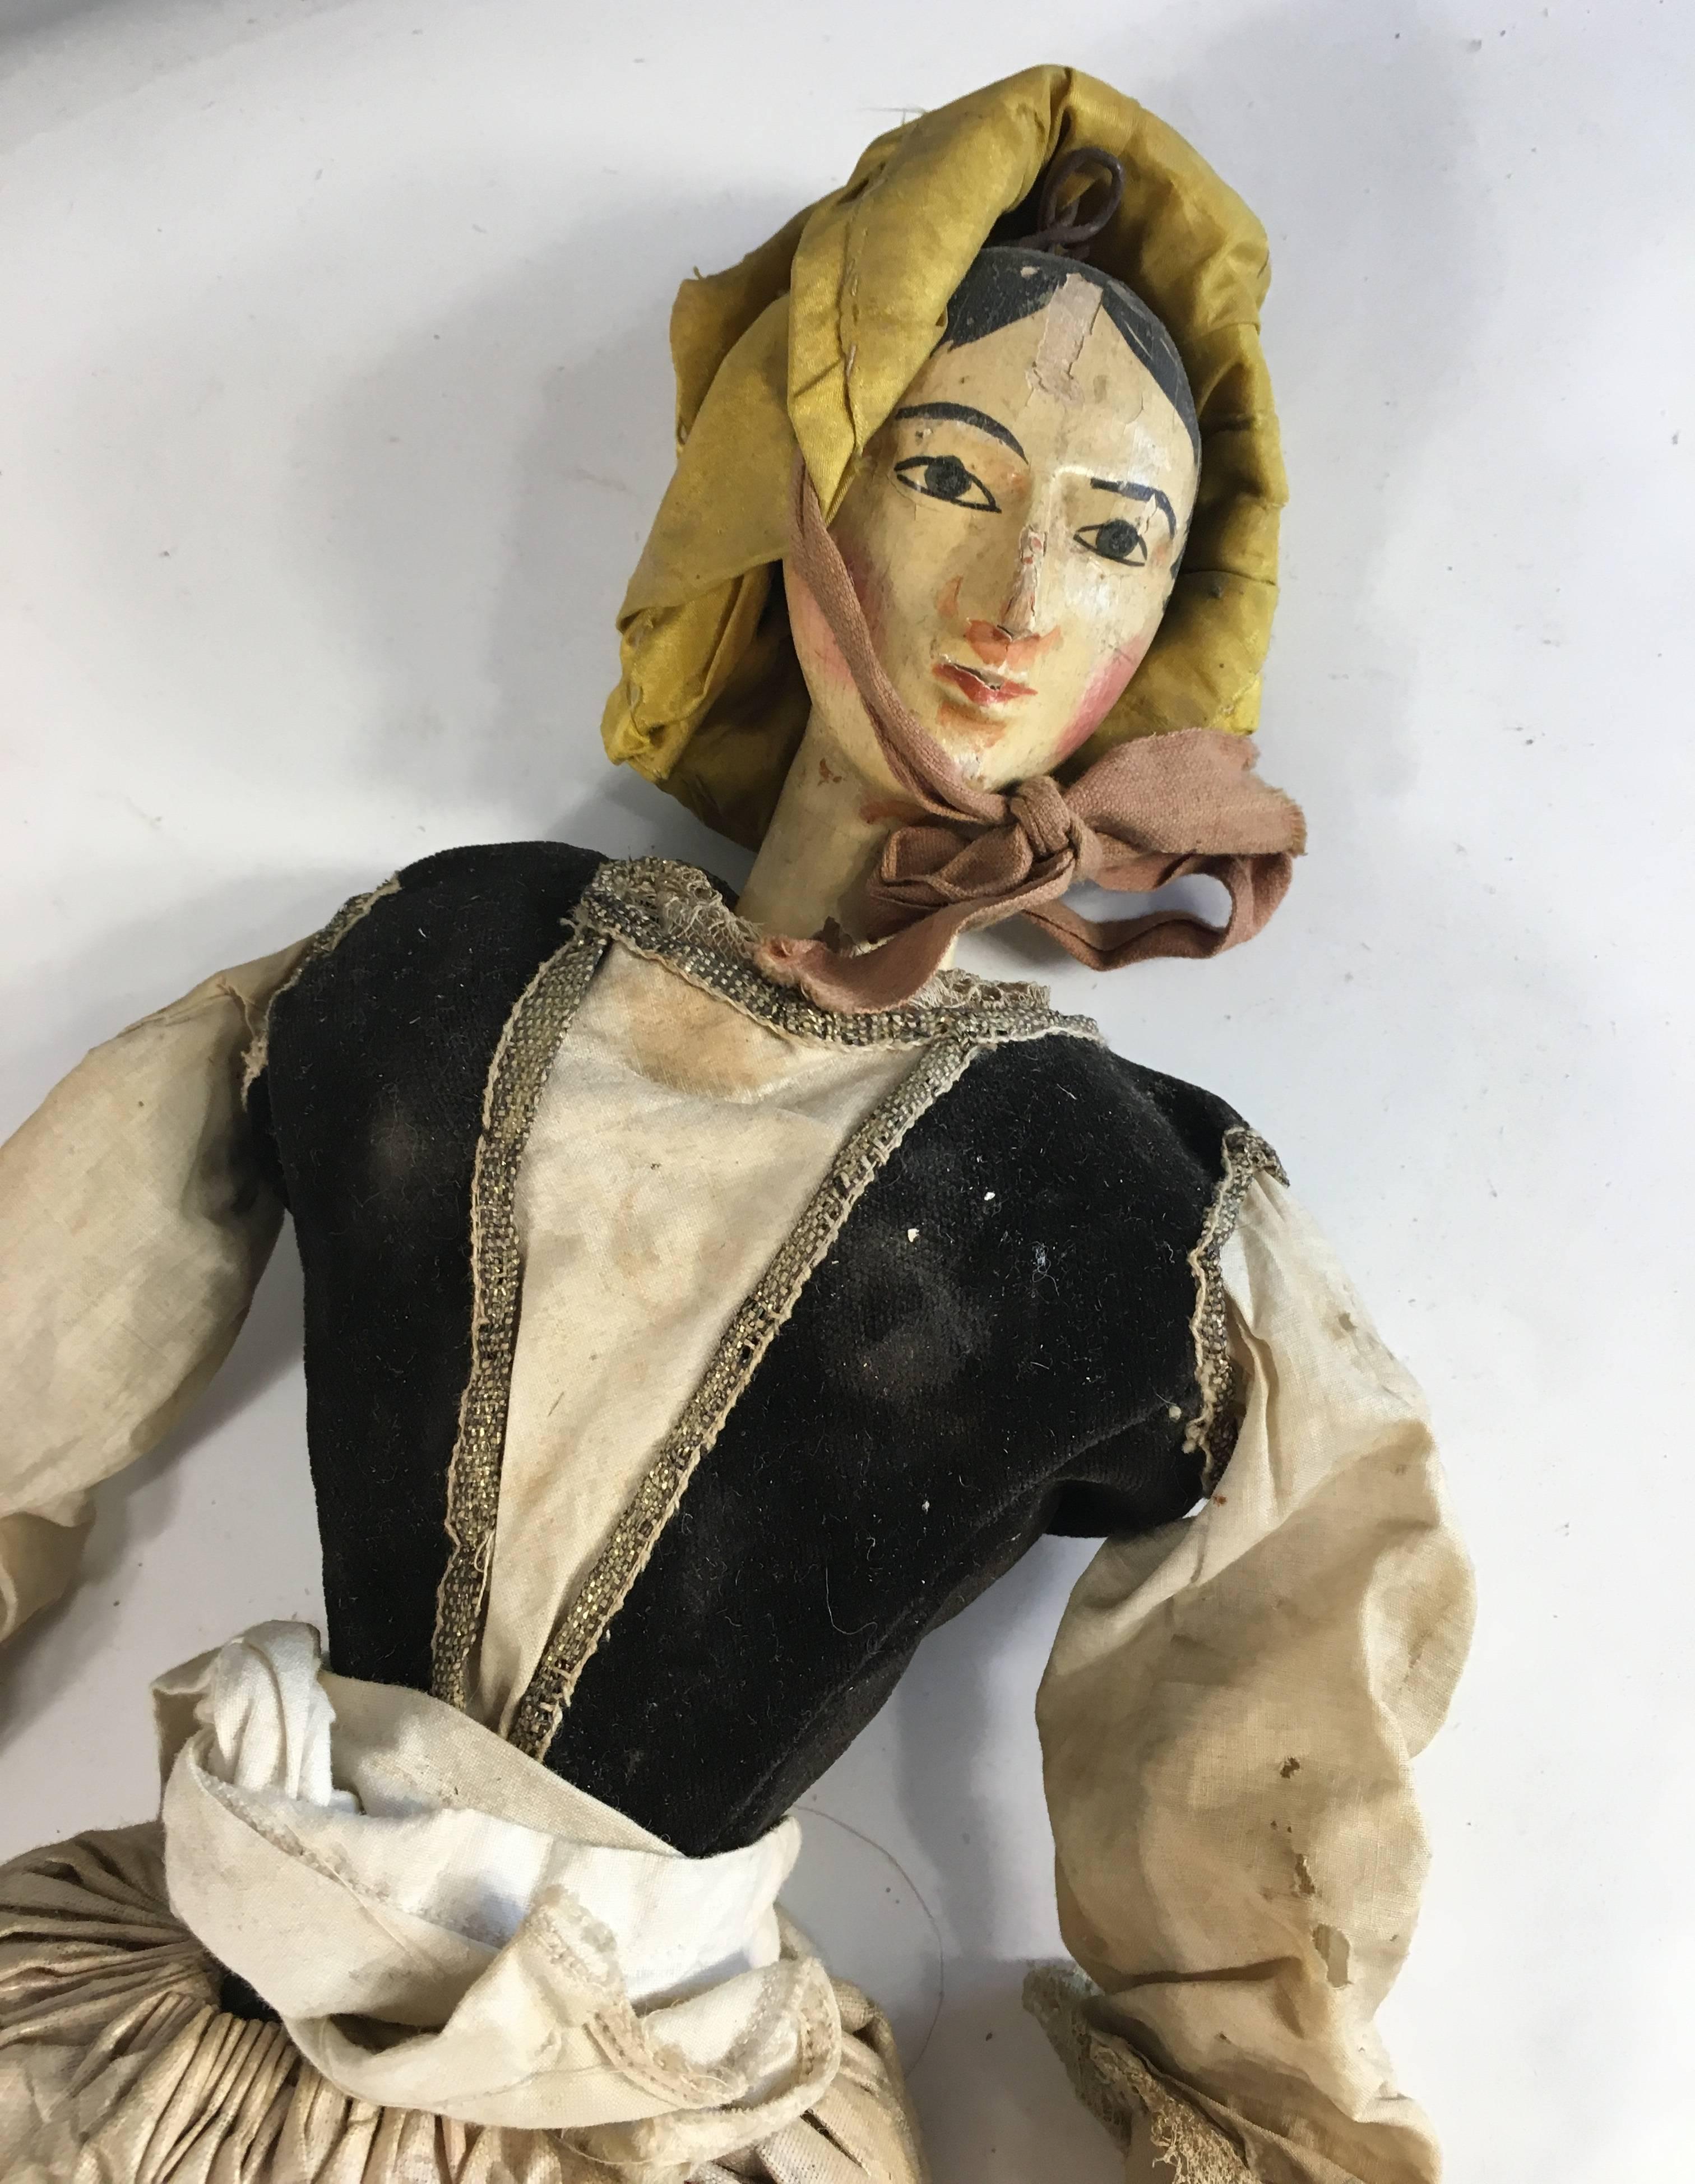 A 19th century, Italian marionette puppet of a peasant woman in carved and painted wood with period costume.